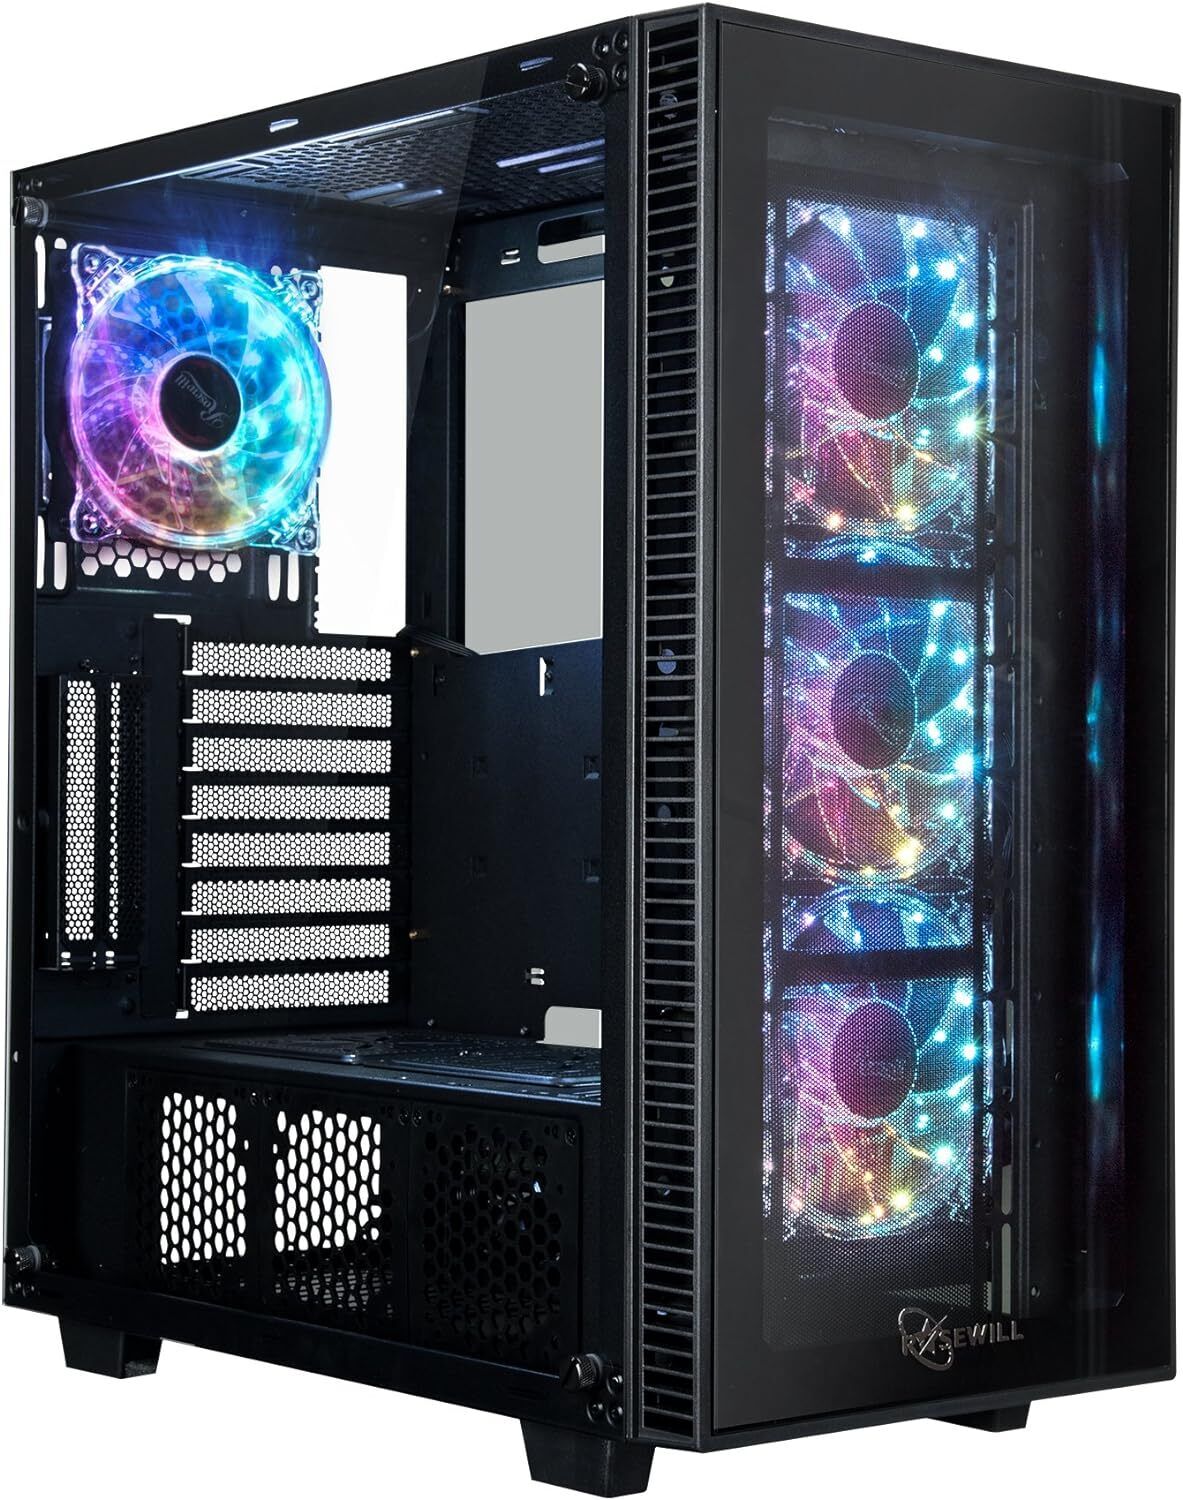 Rosewill Gaming Computer PC Case, ATX Mid Tower, Glass, RGB LED Fans CULLINAN MX